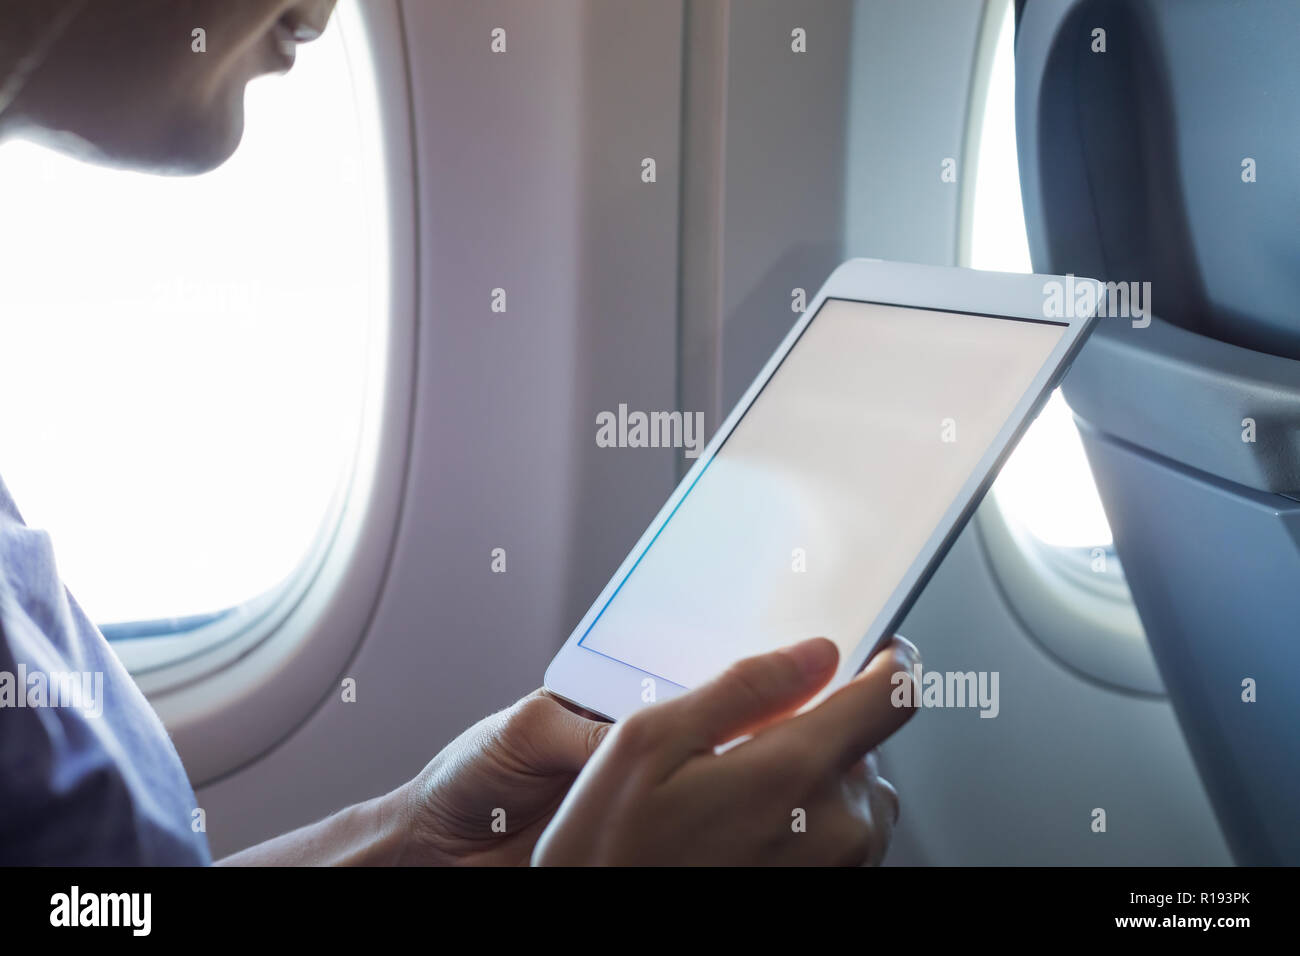 Passenger using tablet computer in airplane cabin during flight with wireless internet to read emails or an ebook, hands holding device with white emp Stock Photo